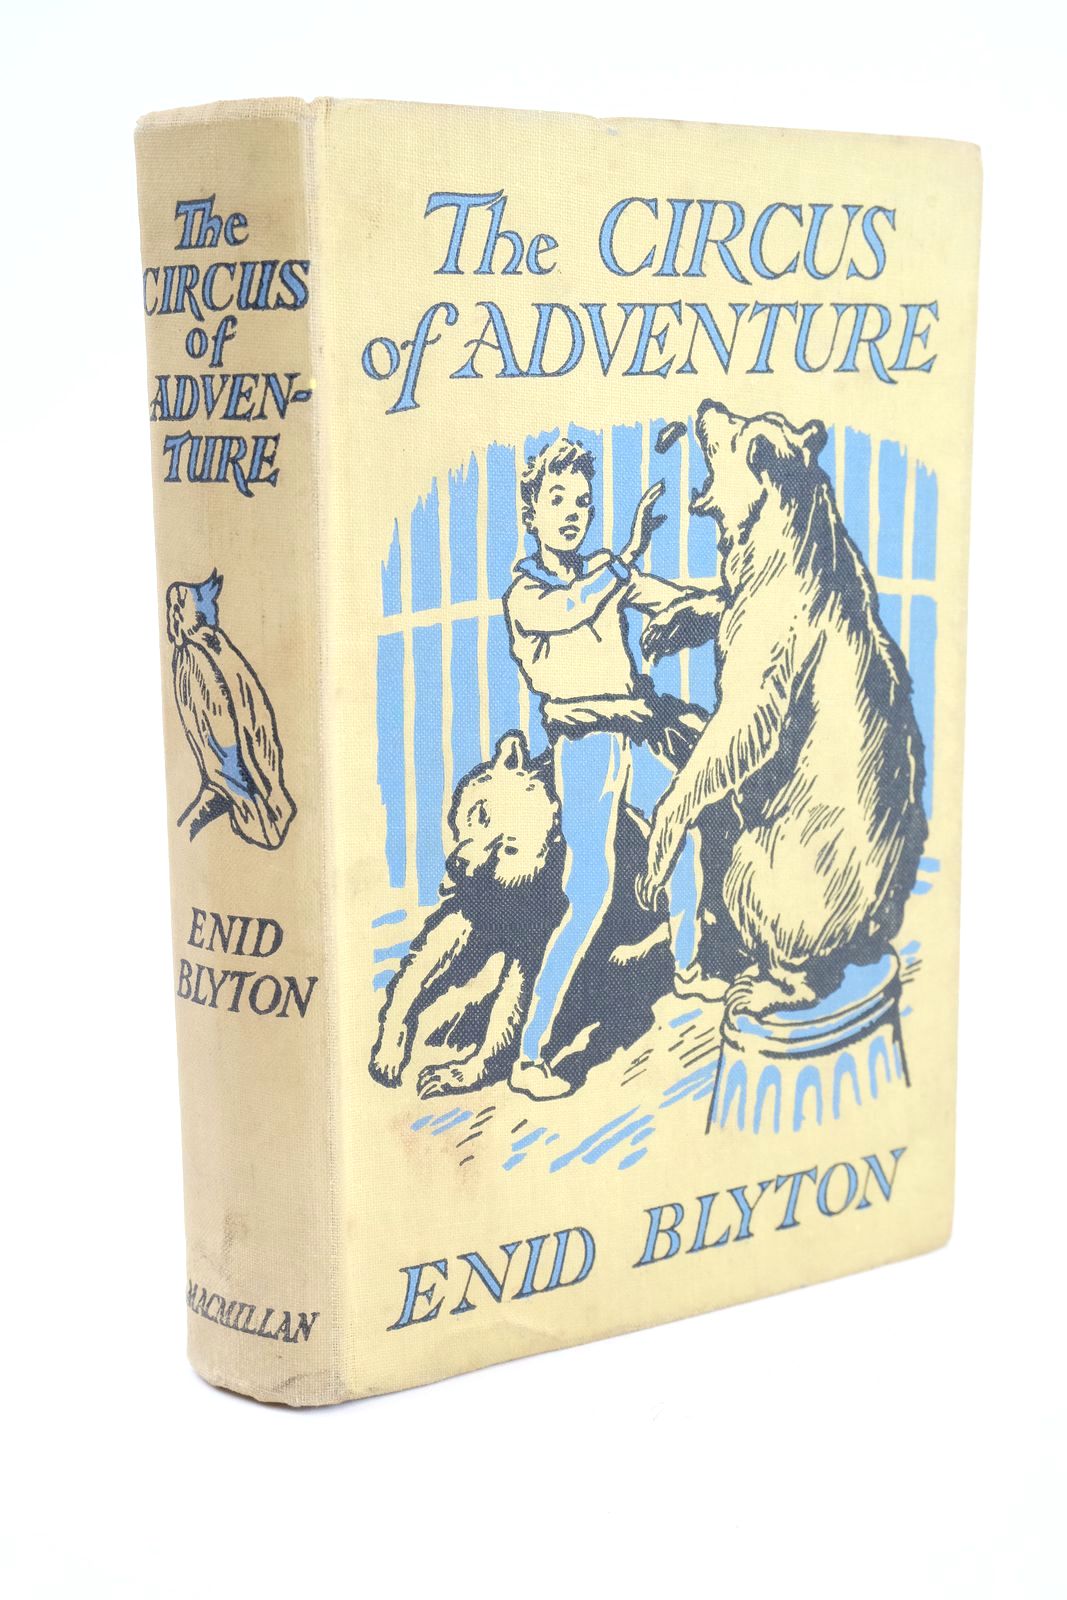 Photo of THE CIRCUS OF ADVENTURE written by Blyton, Enid illustrated by Tresilian, Stuart published by Macmillan &amp; Co. Ltd. (STOCK CODE: 1323940)  for sale by Stella & Rose's Books